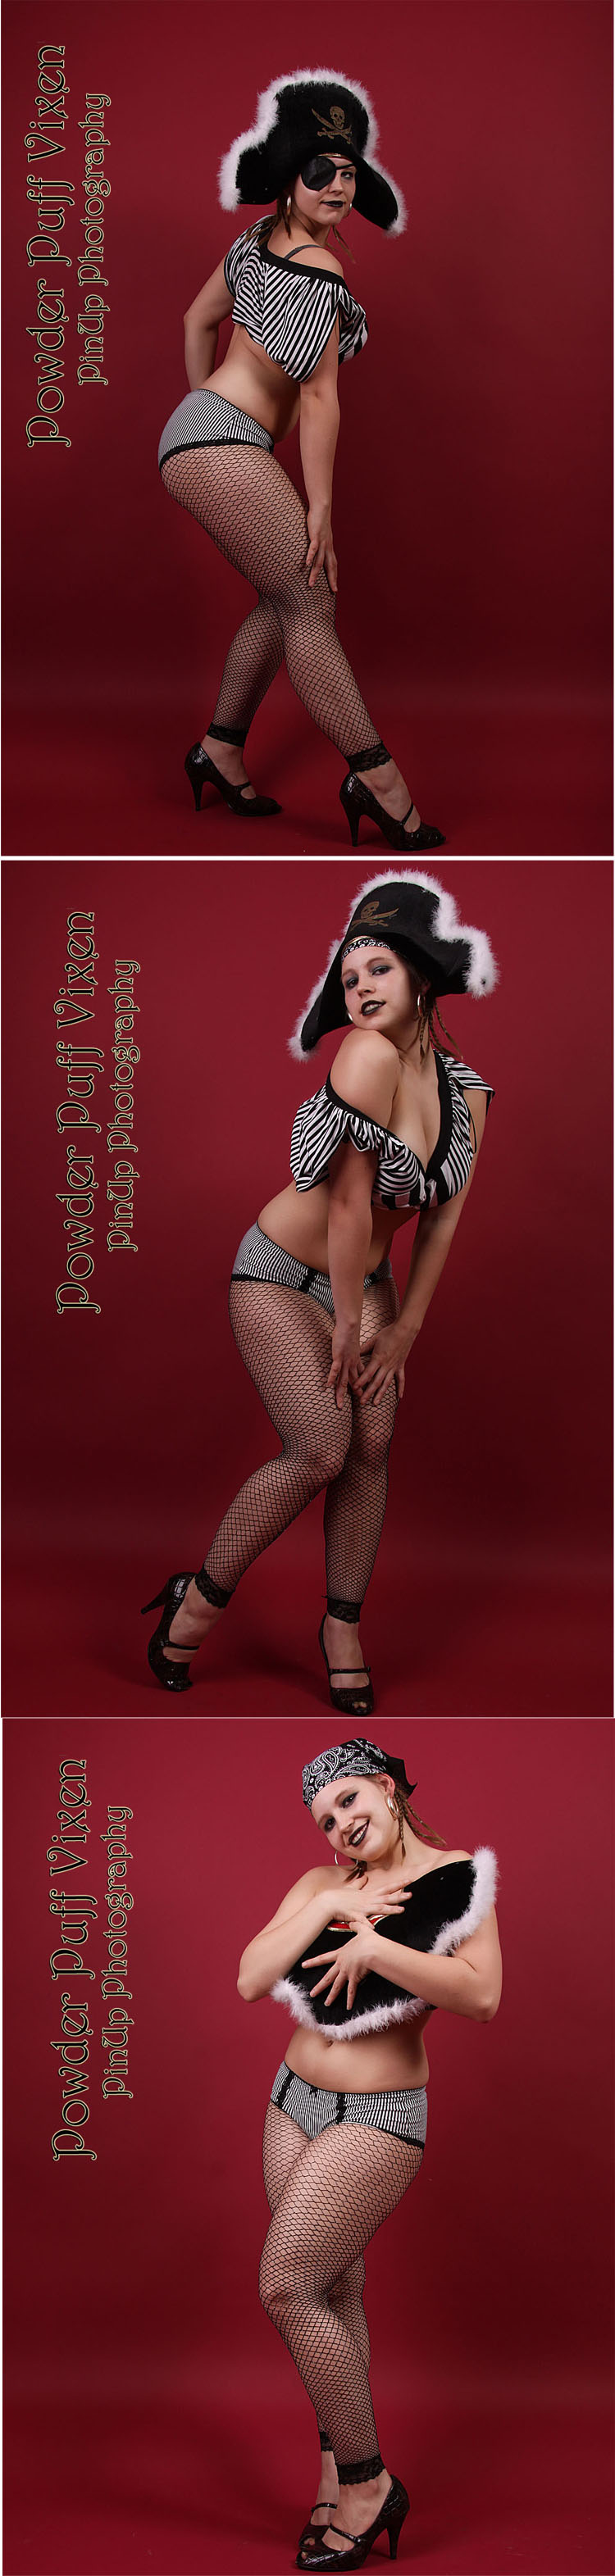 Male and Female model photo shoot of Powder Puff Vixen Pinup and Marciia Gringe